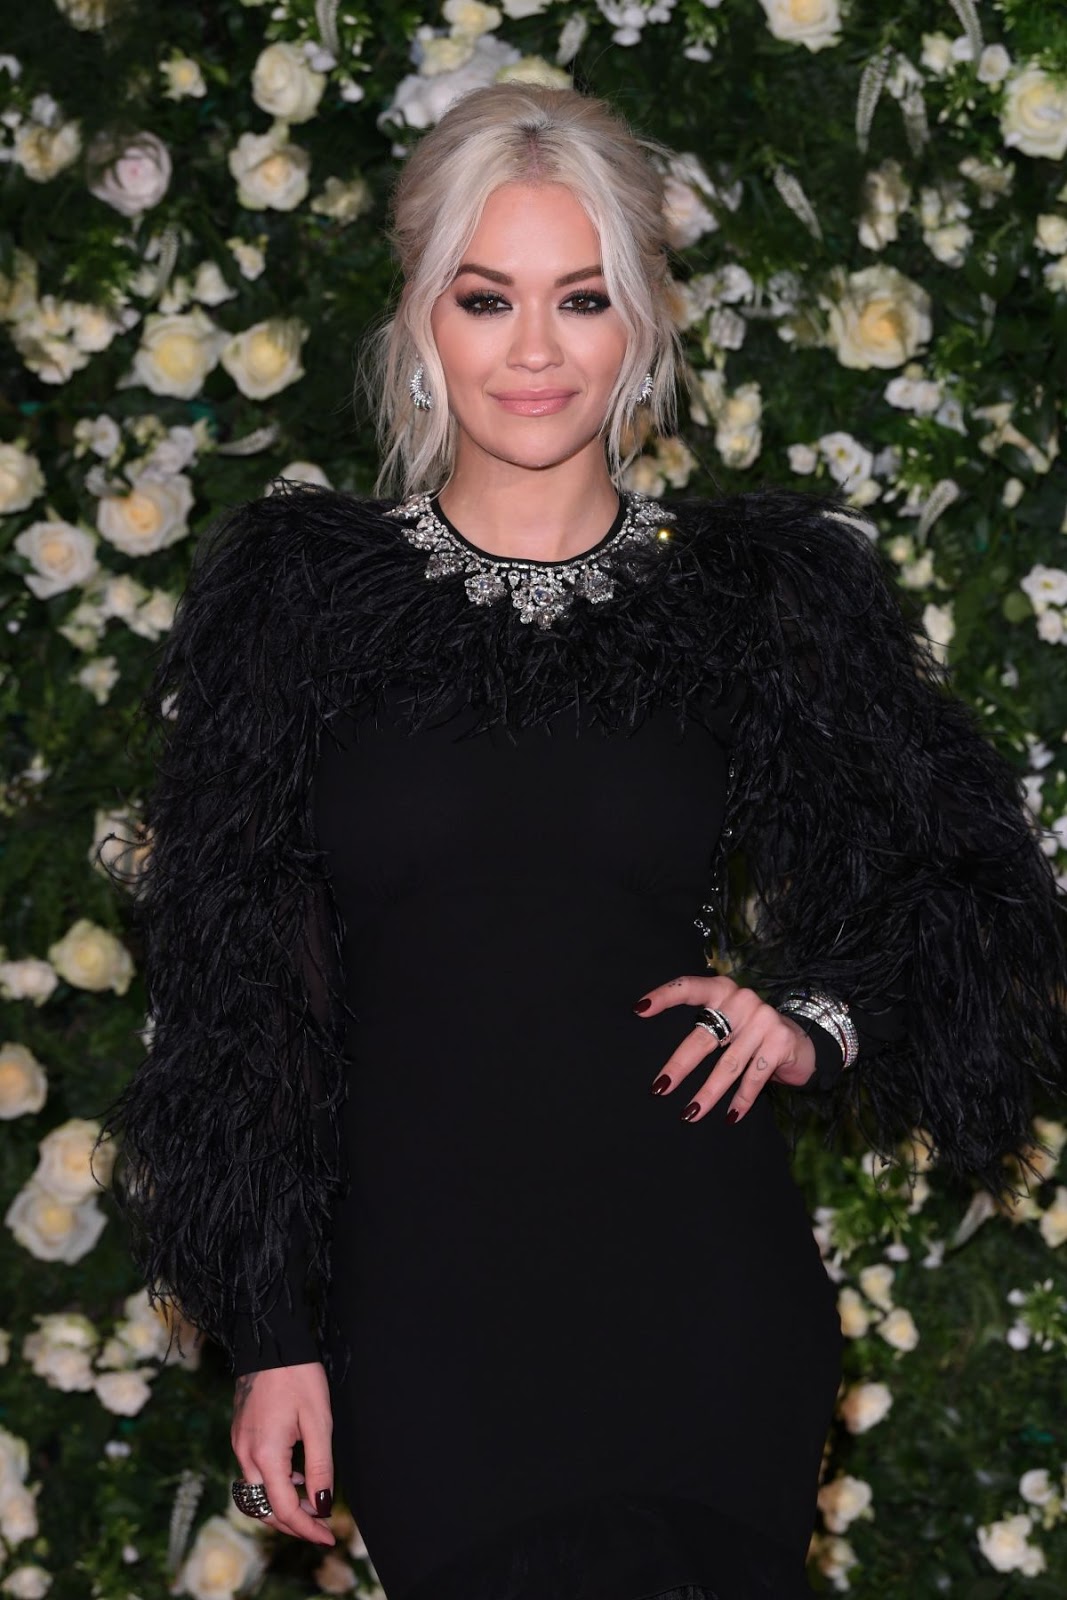 Rita Ora Clicks at Charles Finch Filmmakers Dinner in Cannes 17 May -2019